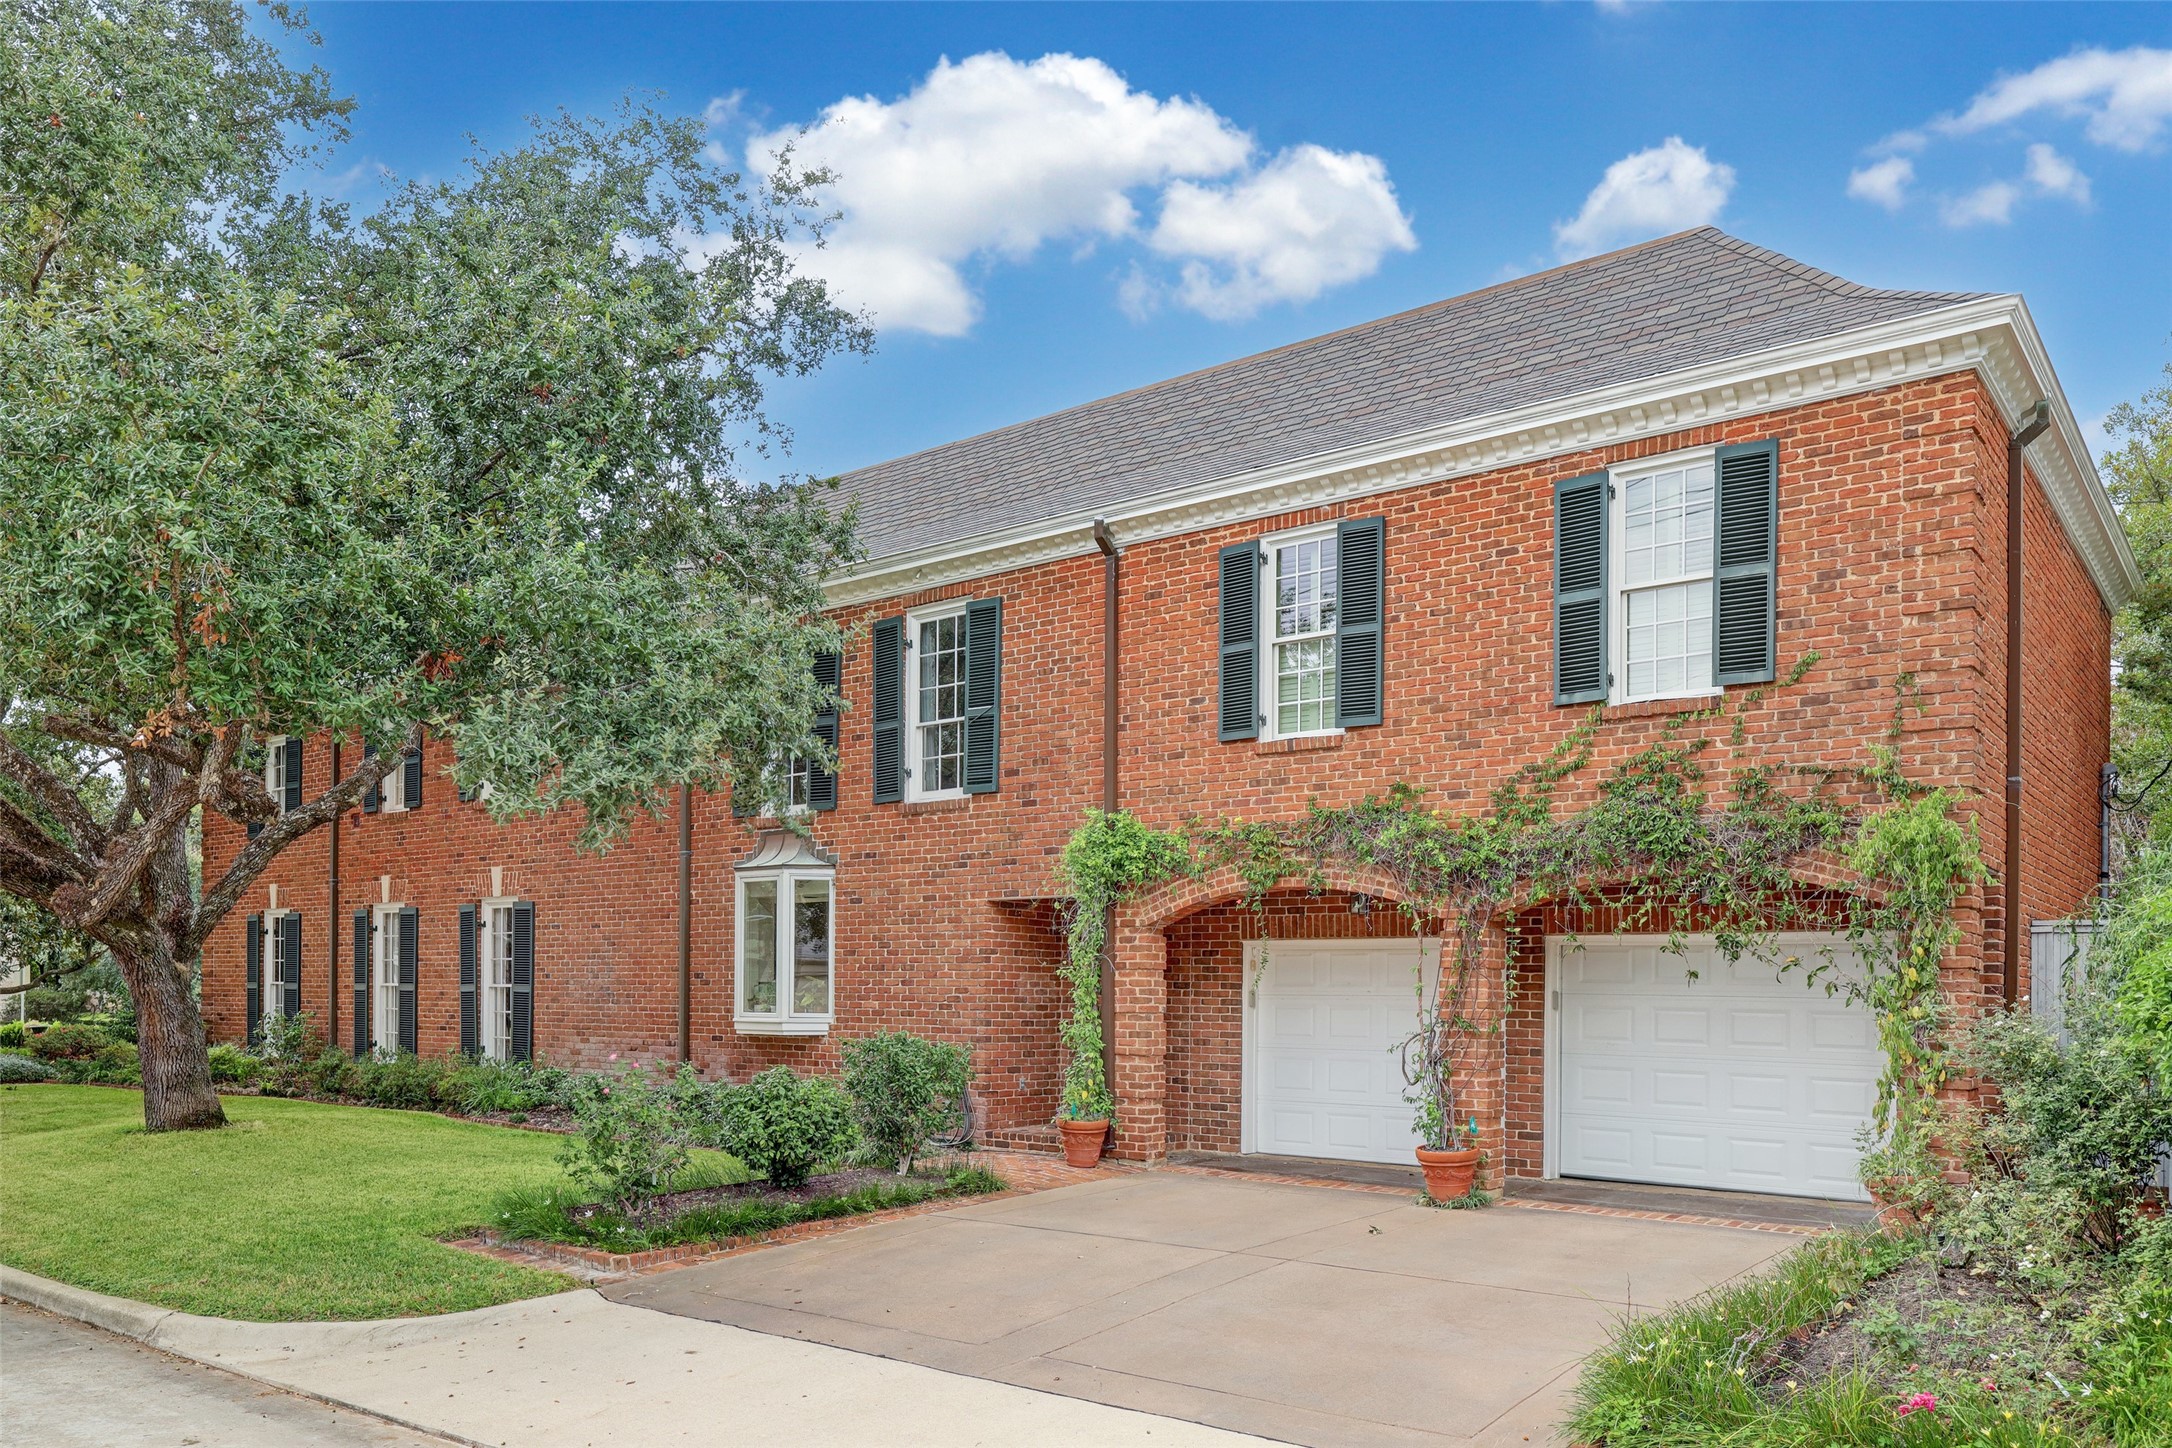 Nestled at the corner of Reba Dr and Bellemeade St, this property showcases an expansive, manicured side yard, large trees, and an oversized two car garage.